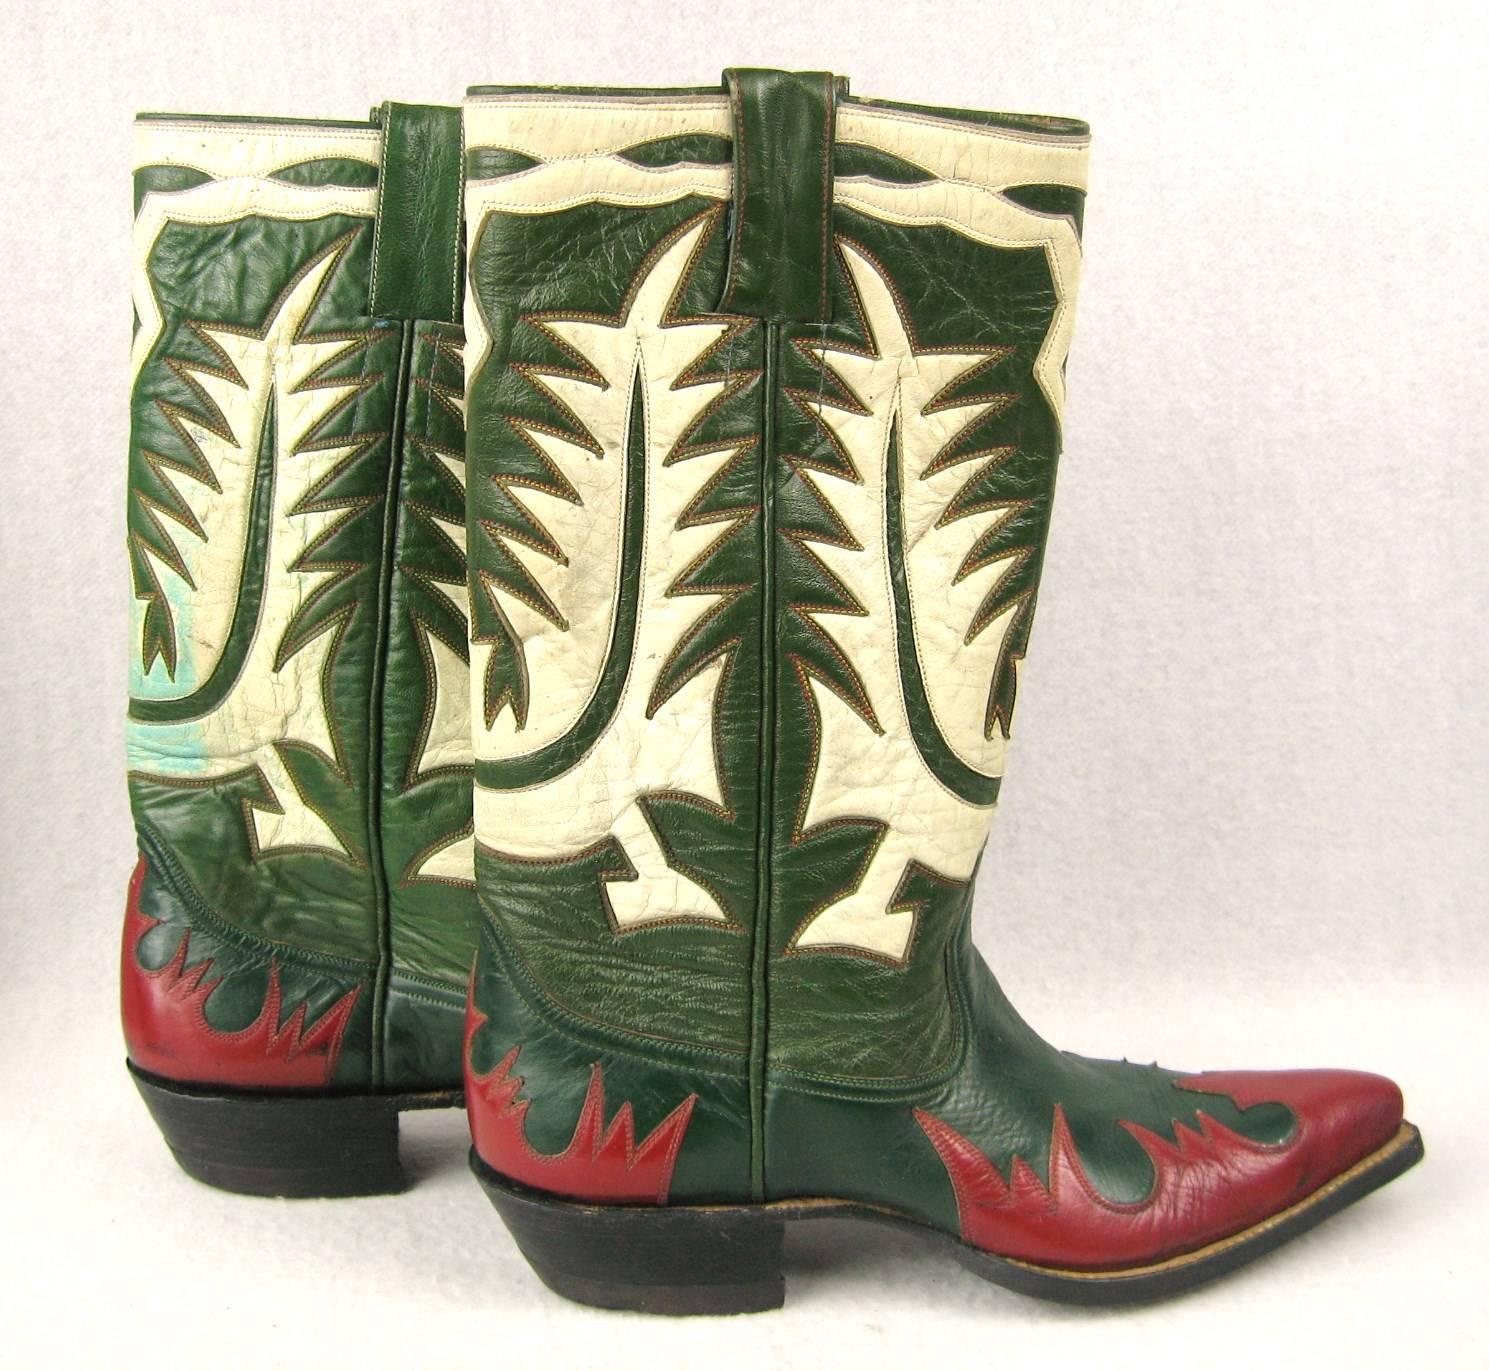 1950s Cool and funky Hand made Early cowboy boots -Red Green and white
Measures 
3.60 w x 11.5 toe to heel 
Heel 1.5 stacked heel
Size 6.5 I'm estimating please use measurements as these are vintage 
Any questions please call, email or hit contact 